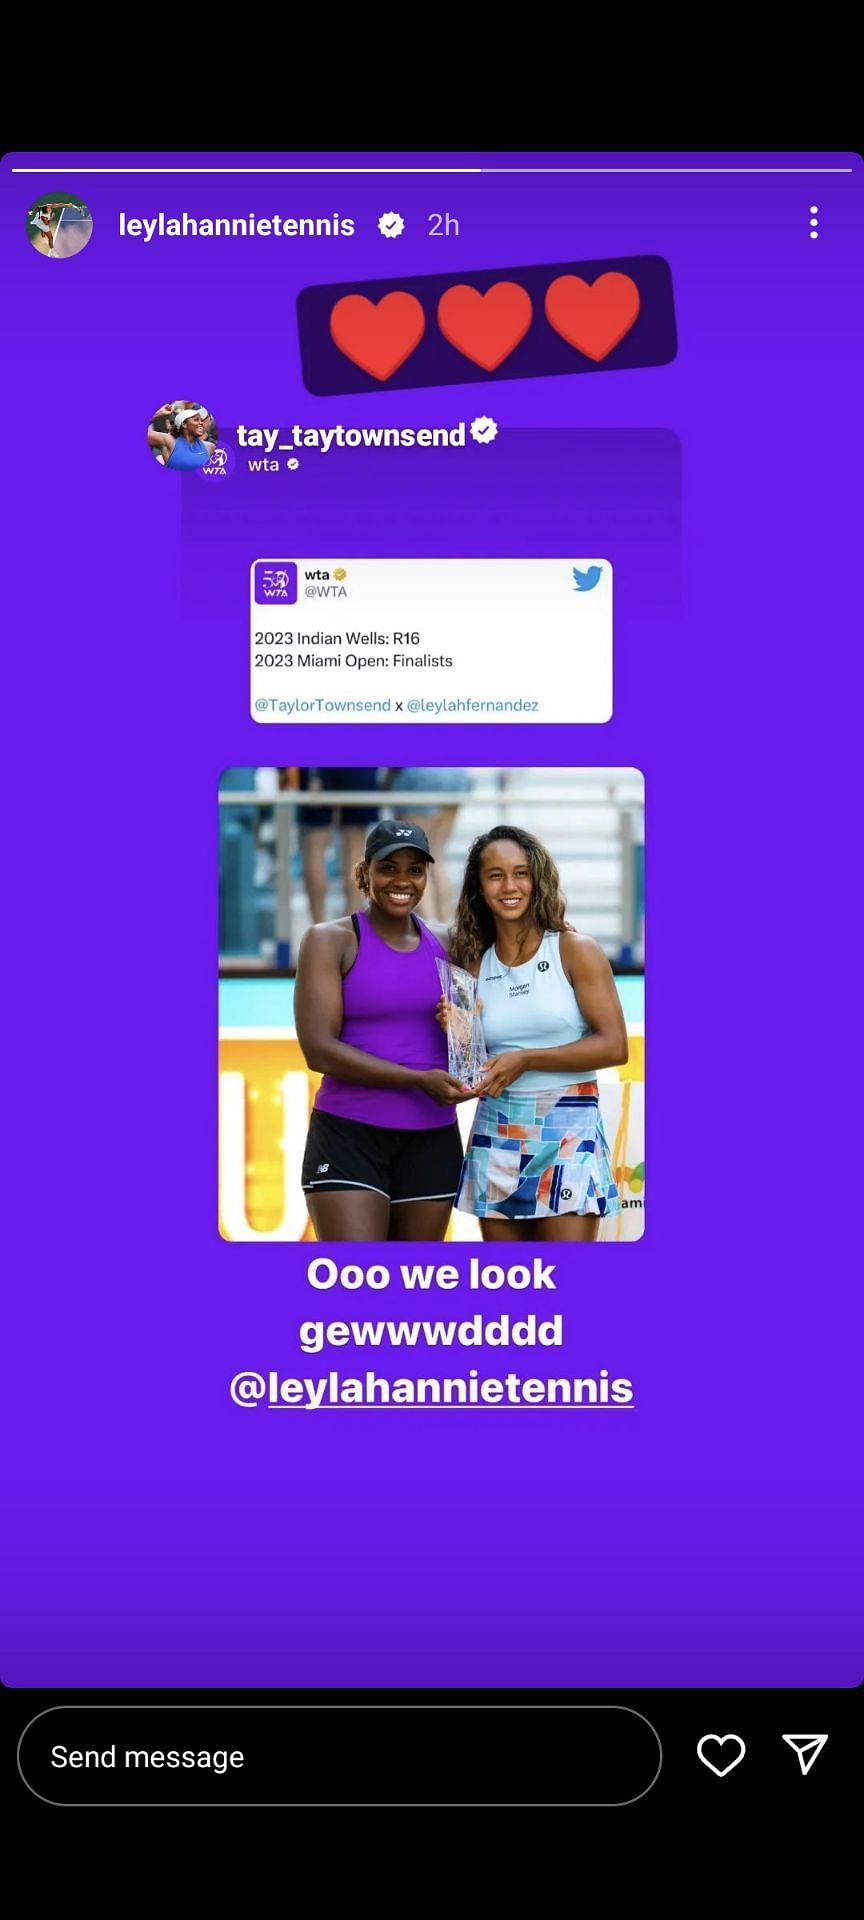 Fernandez reacts to a post shared by Taylor Townsend on Instagram